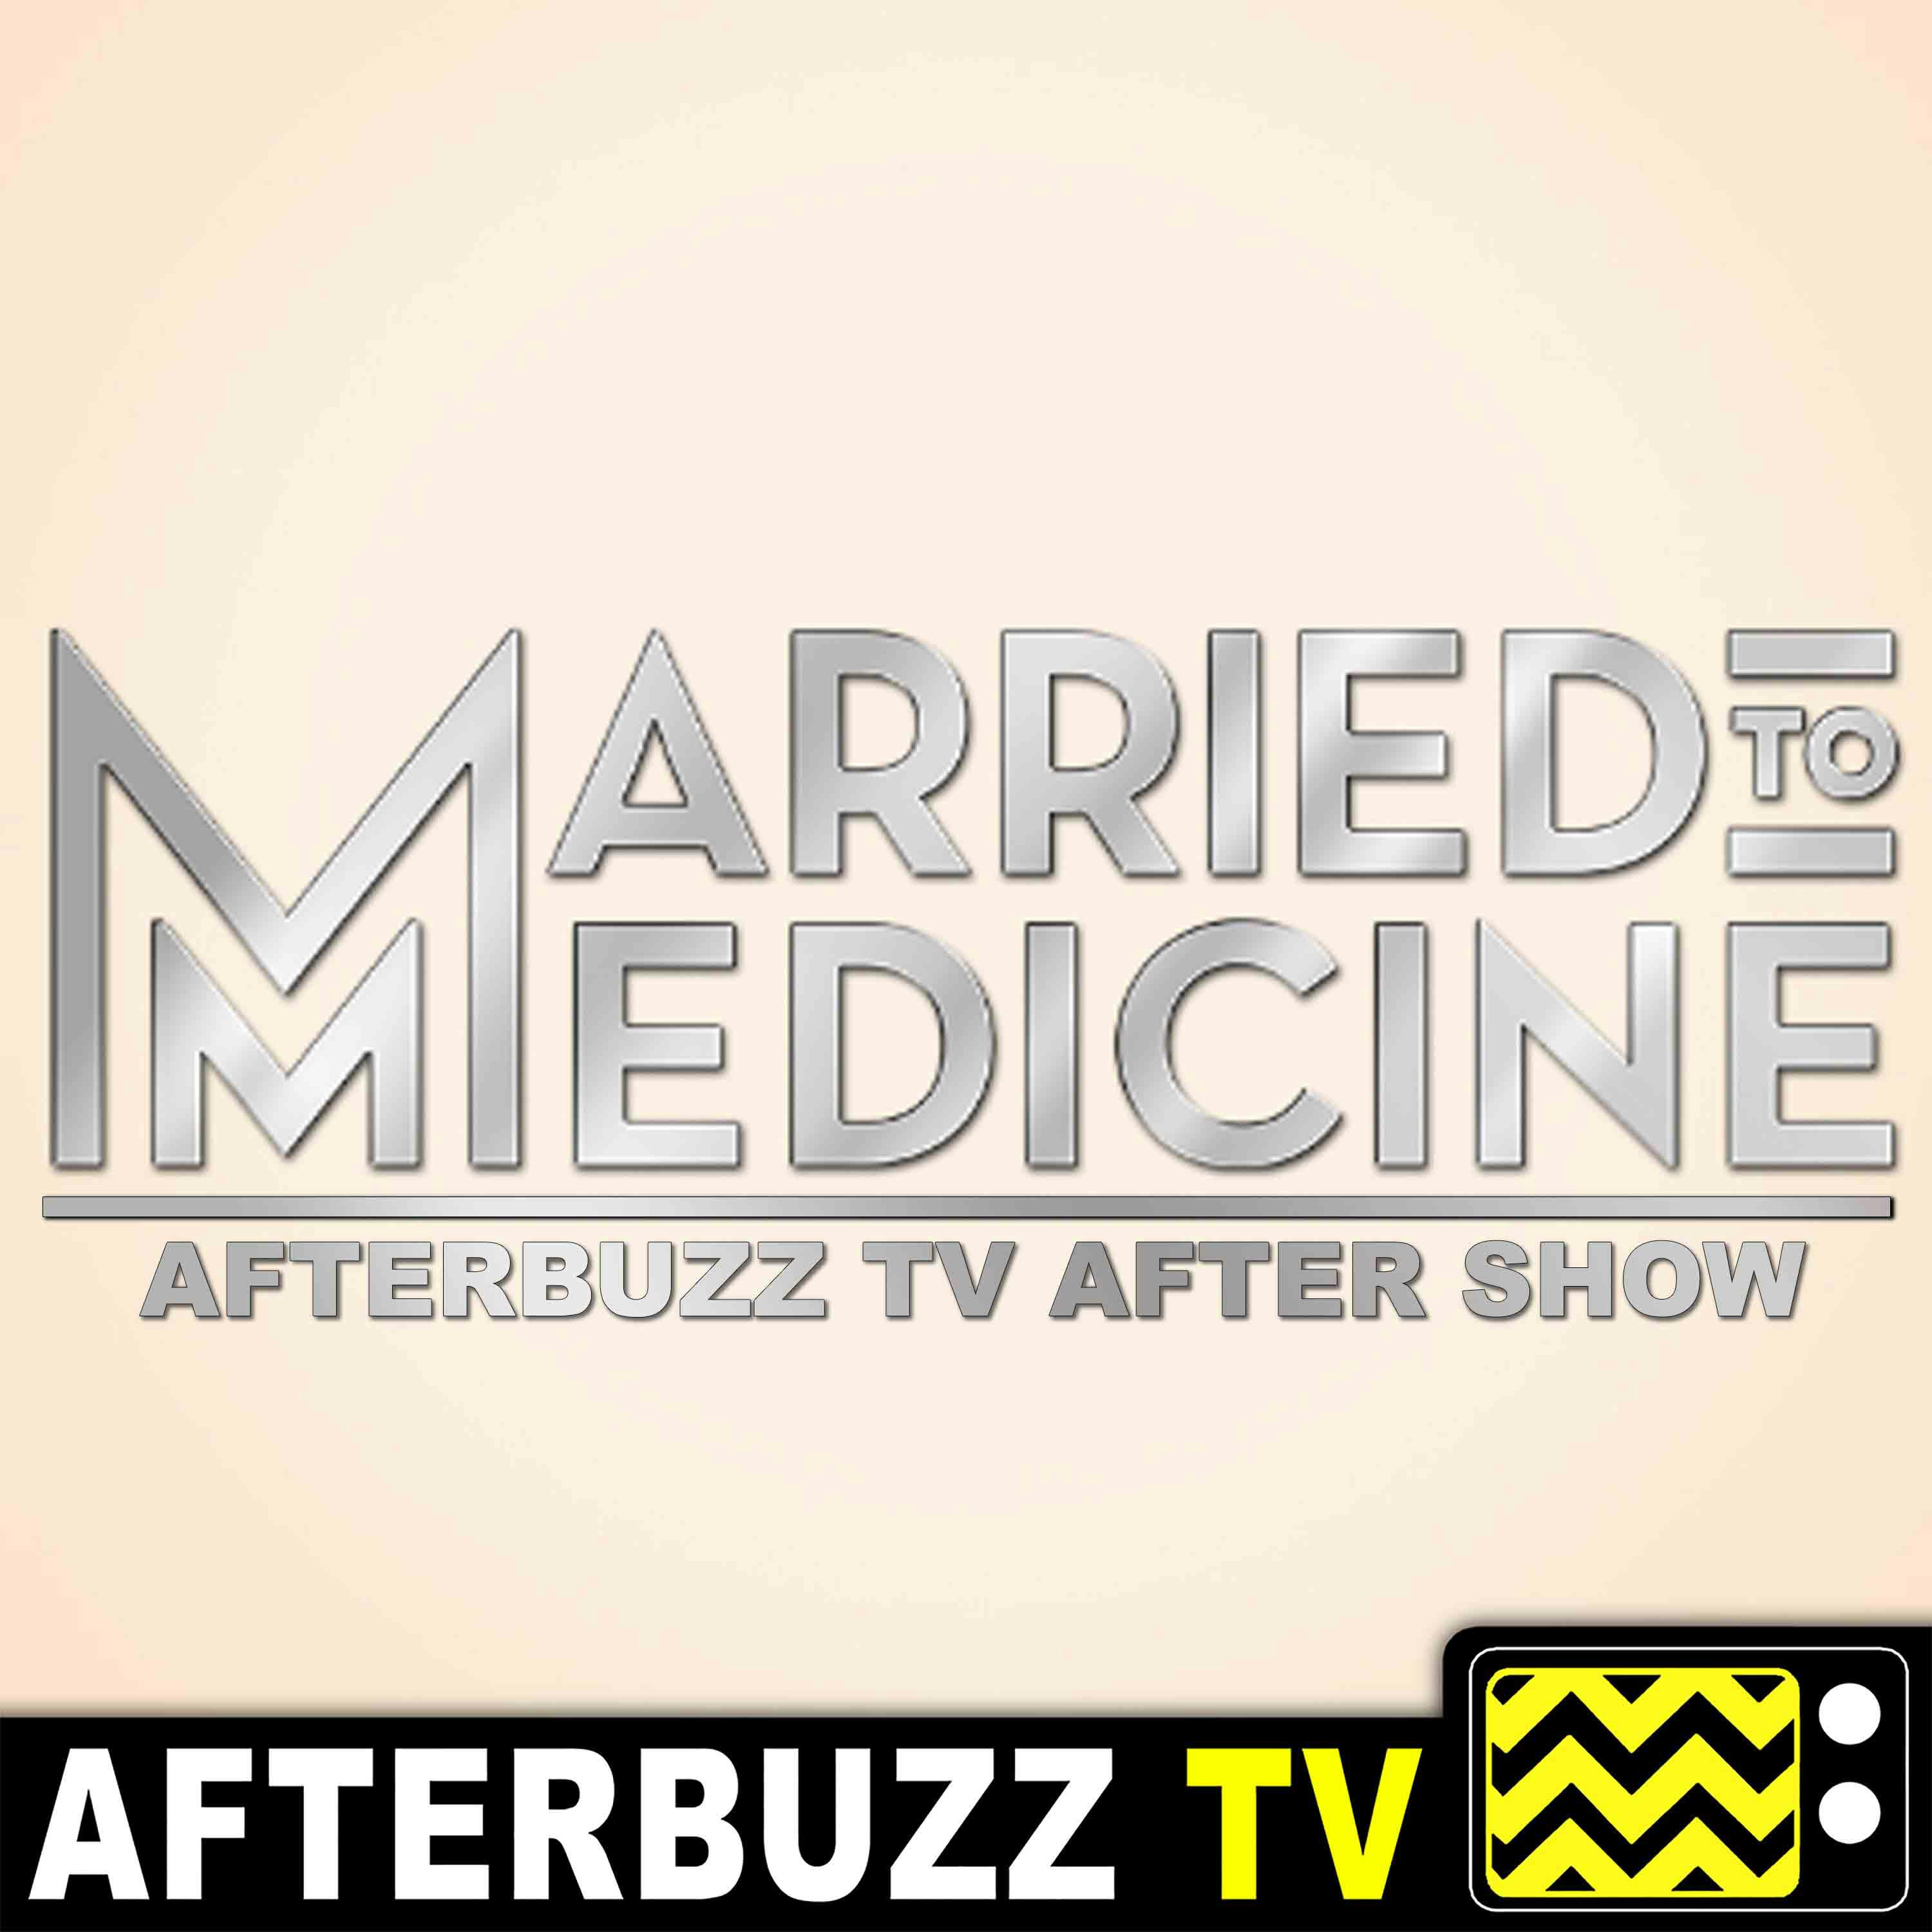 "Revenge of the Sip and Paint; Swap Till You Drop" Season 7 Episodes 12 & 13 'Married to Medicine' Review